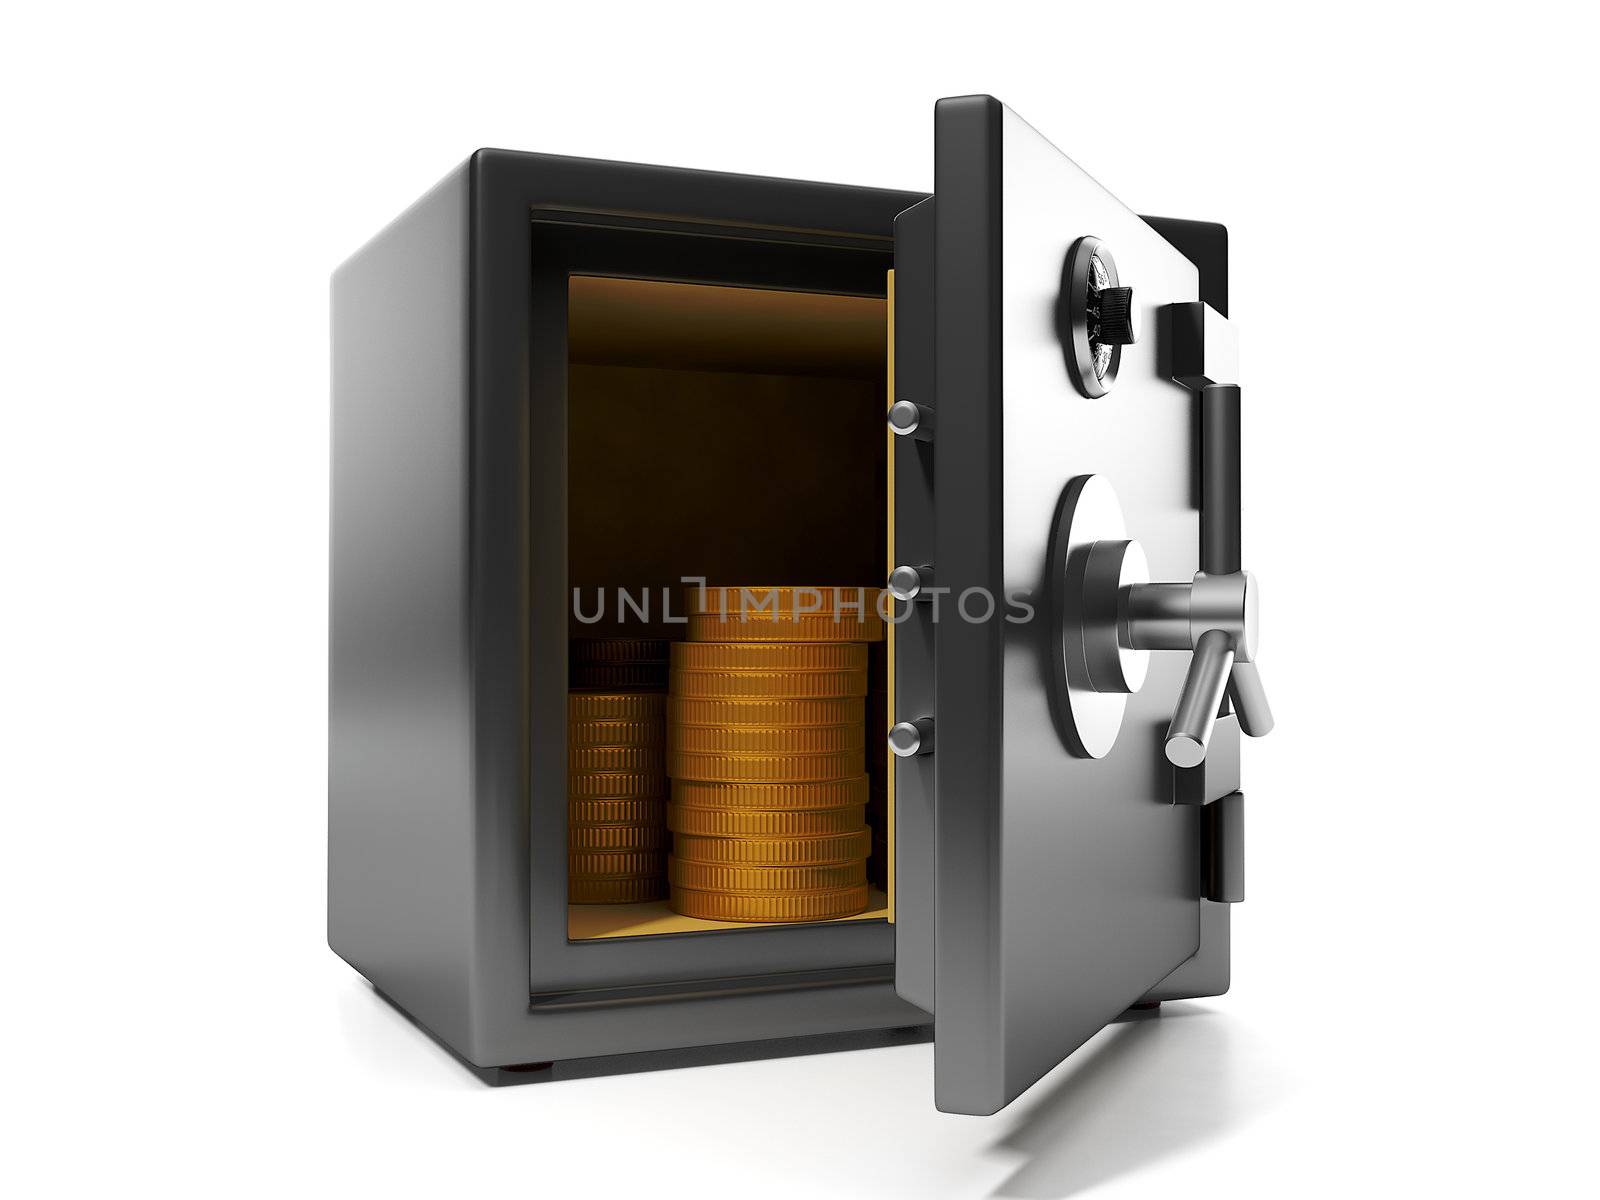 3d illustration: Money savings. Group of coins in the safe keeping money safe protection